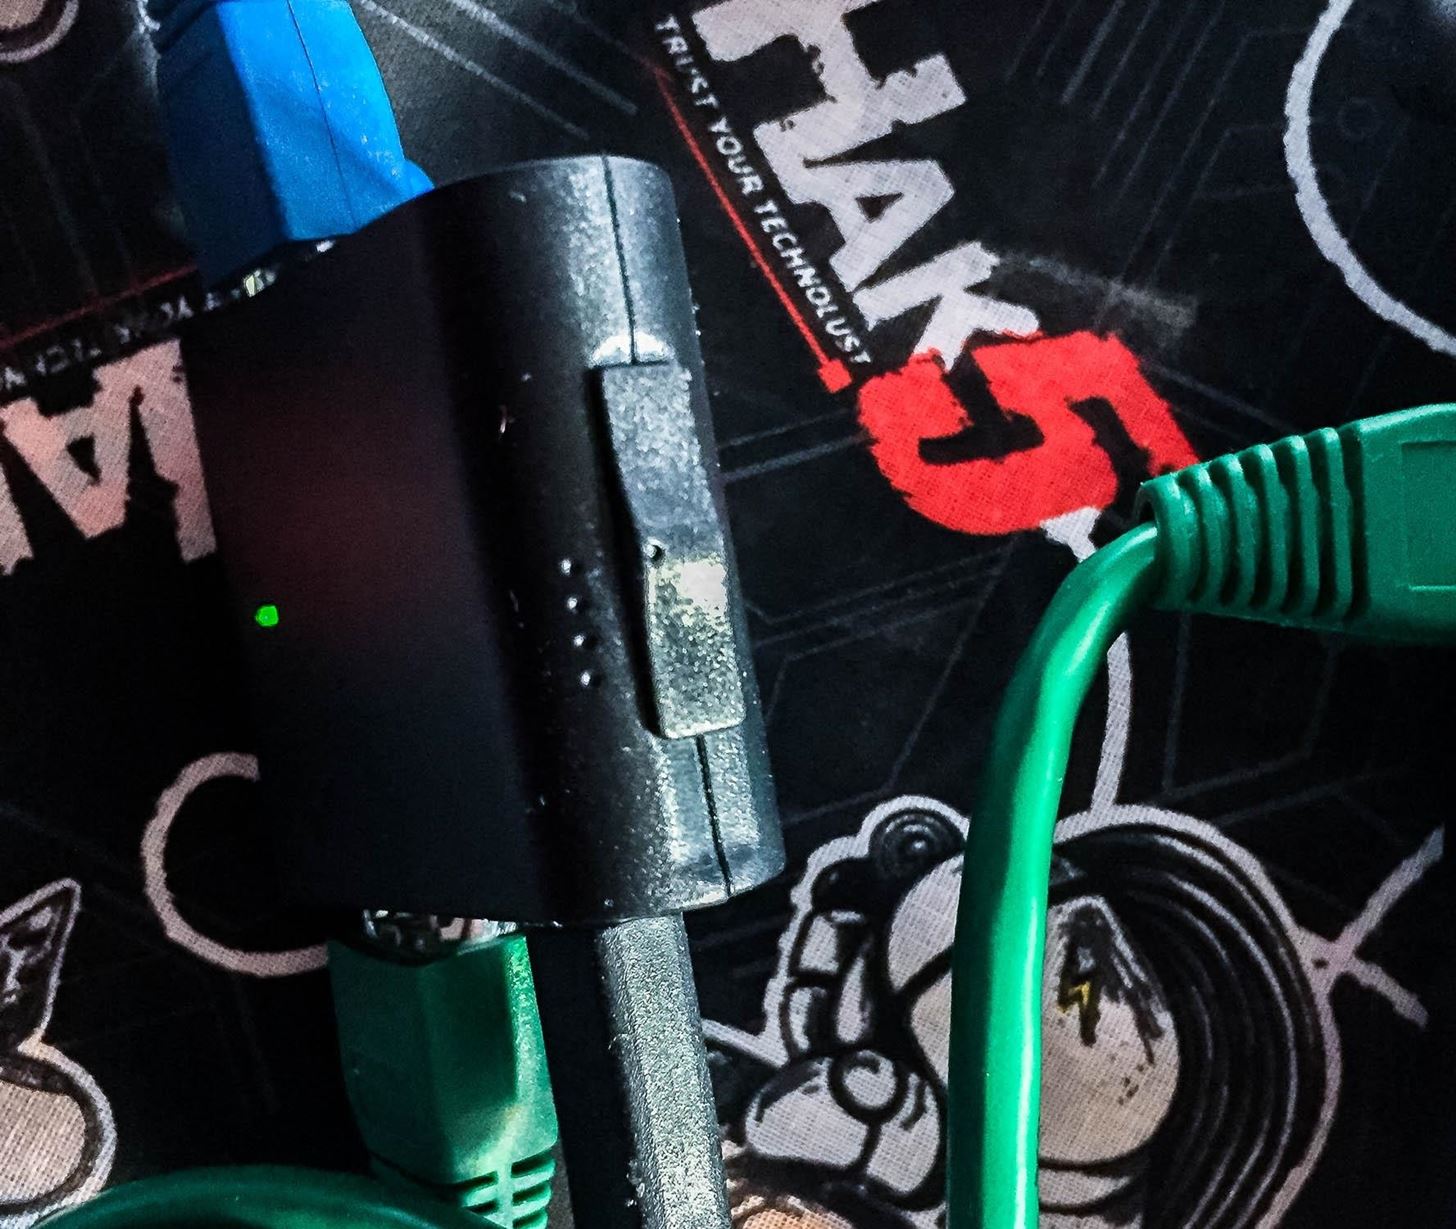 Hak5 Just Released the Packet Squirrel